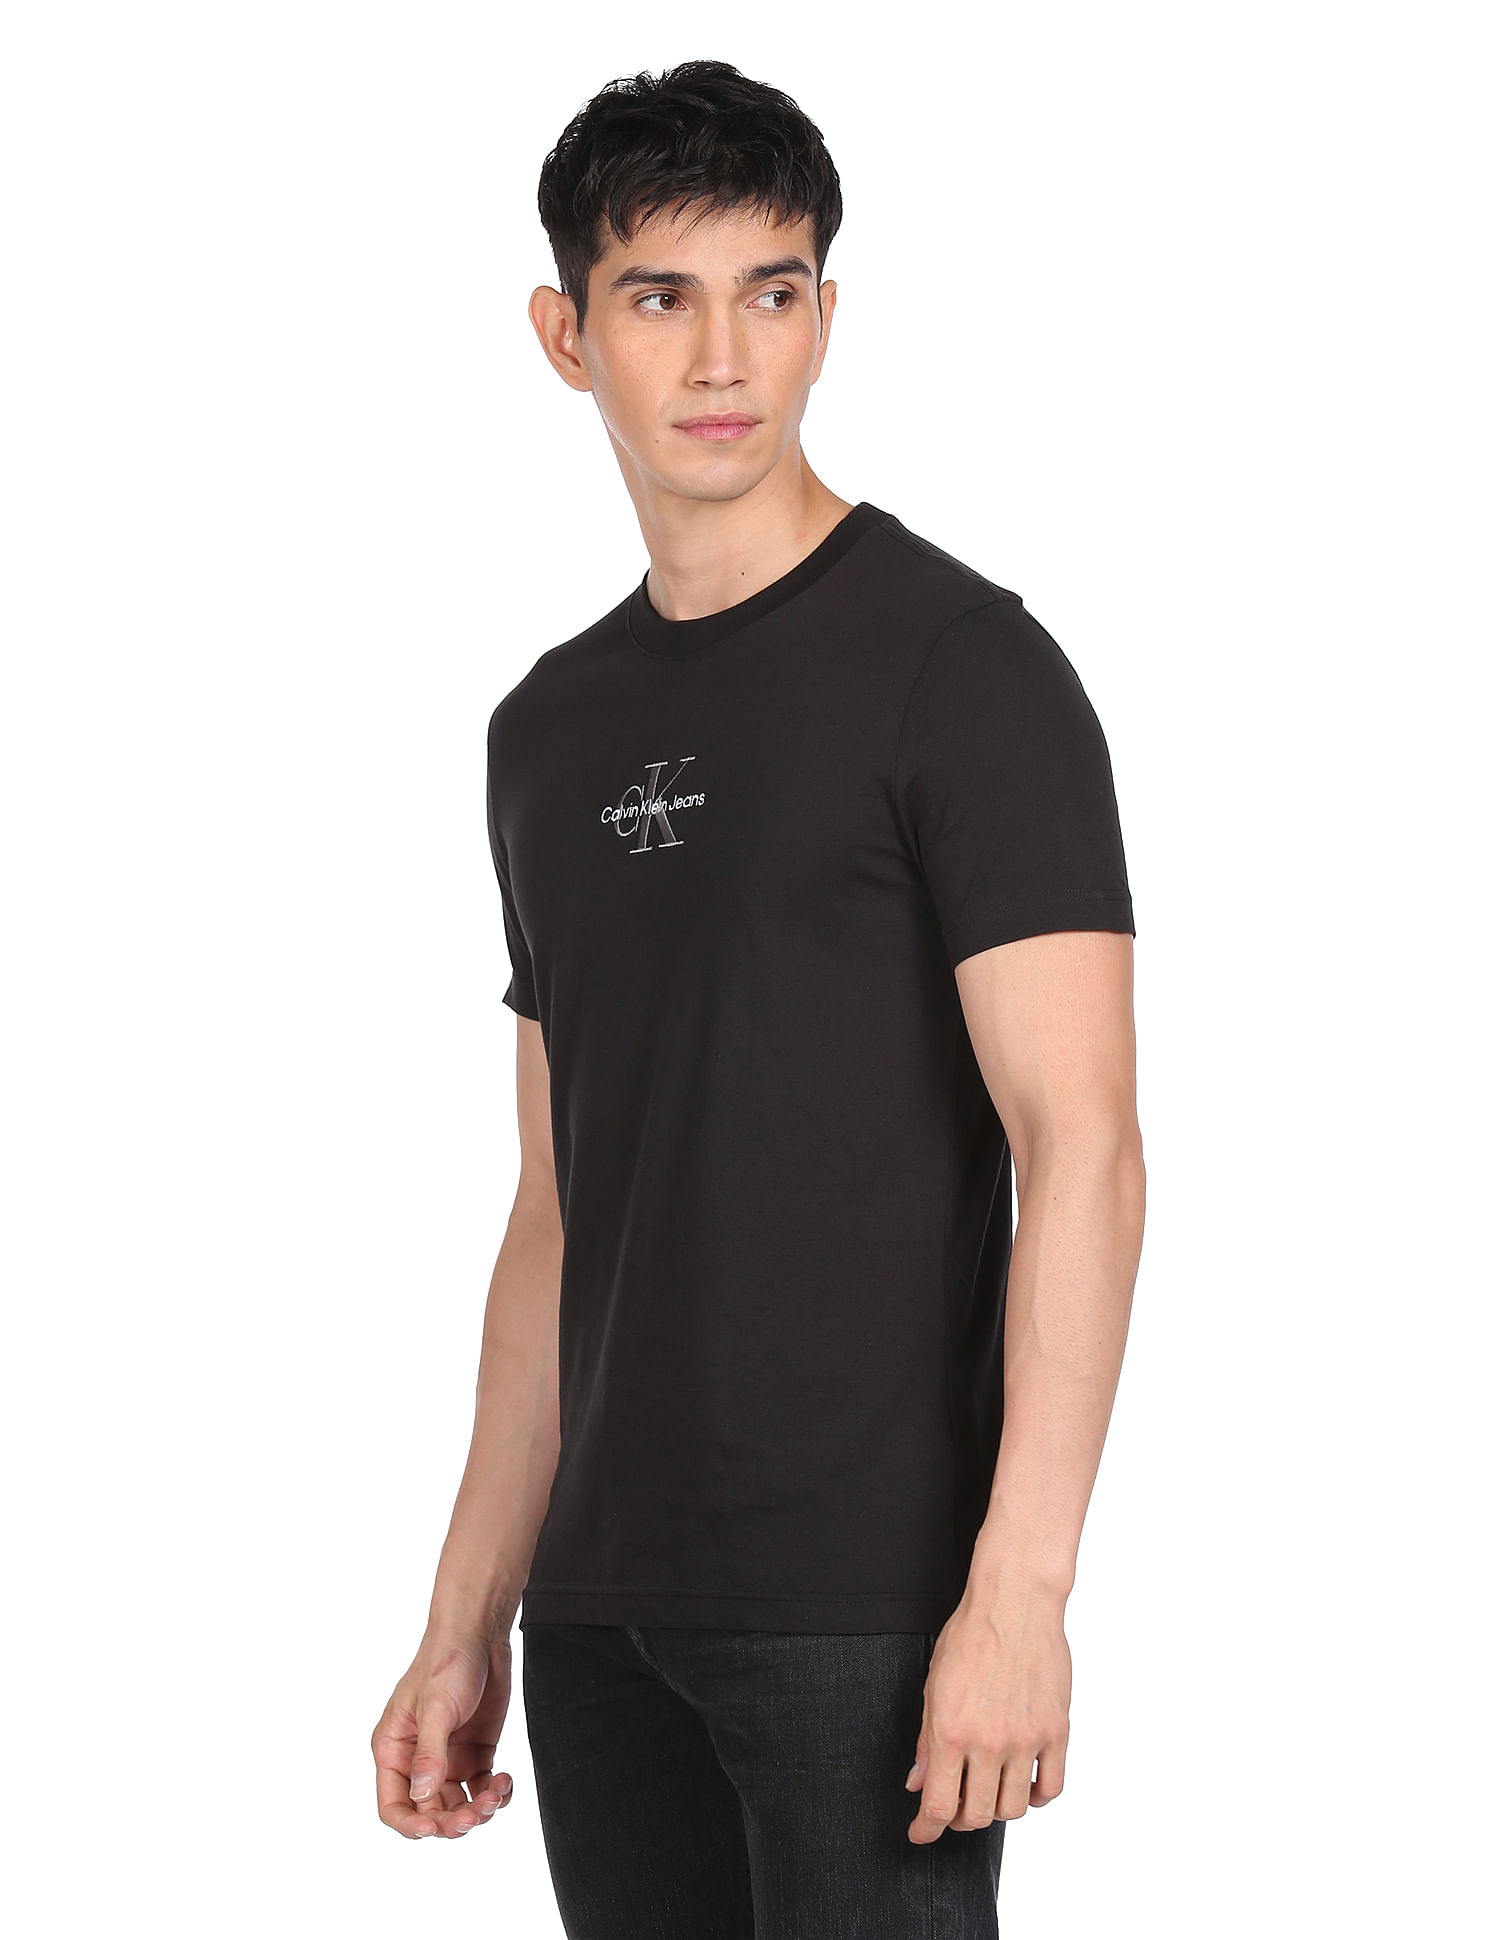 Calvin Klein Jeans T-Shirts & Vests for Men - Shop Now at Farfetch Canada